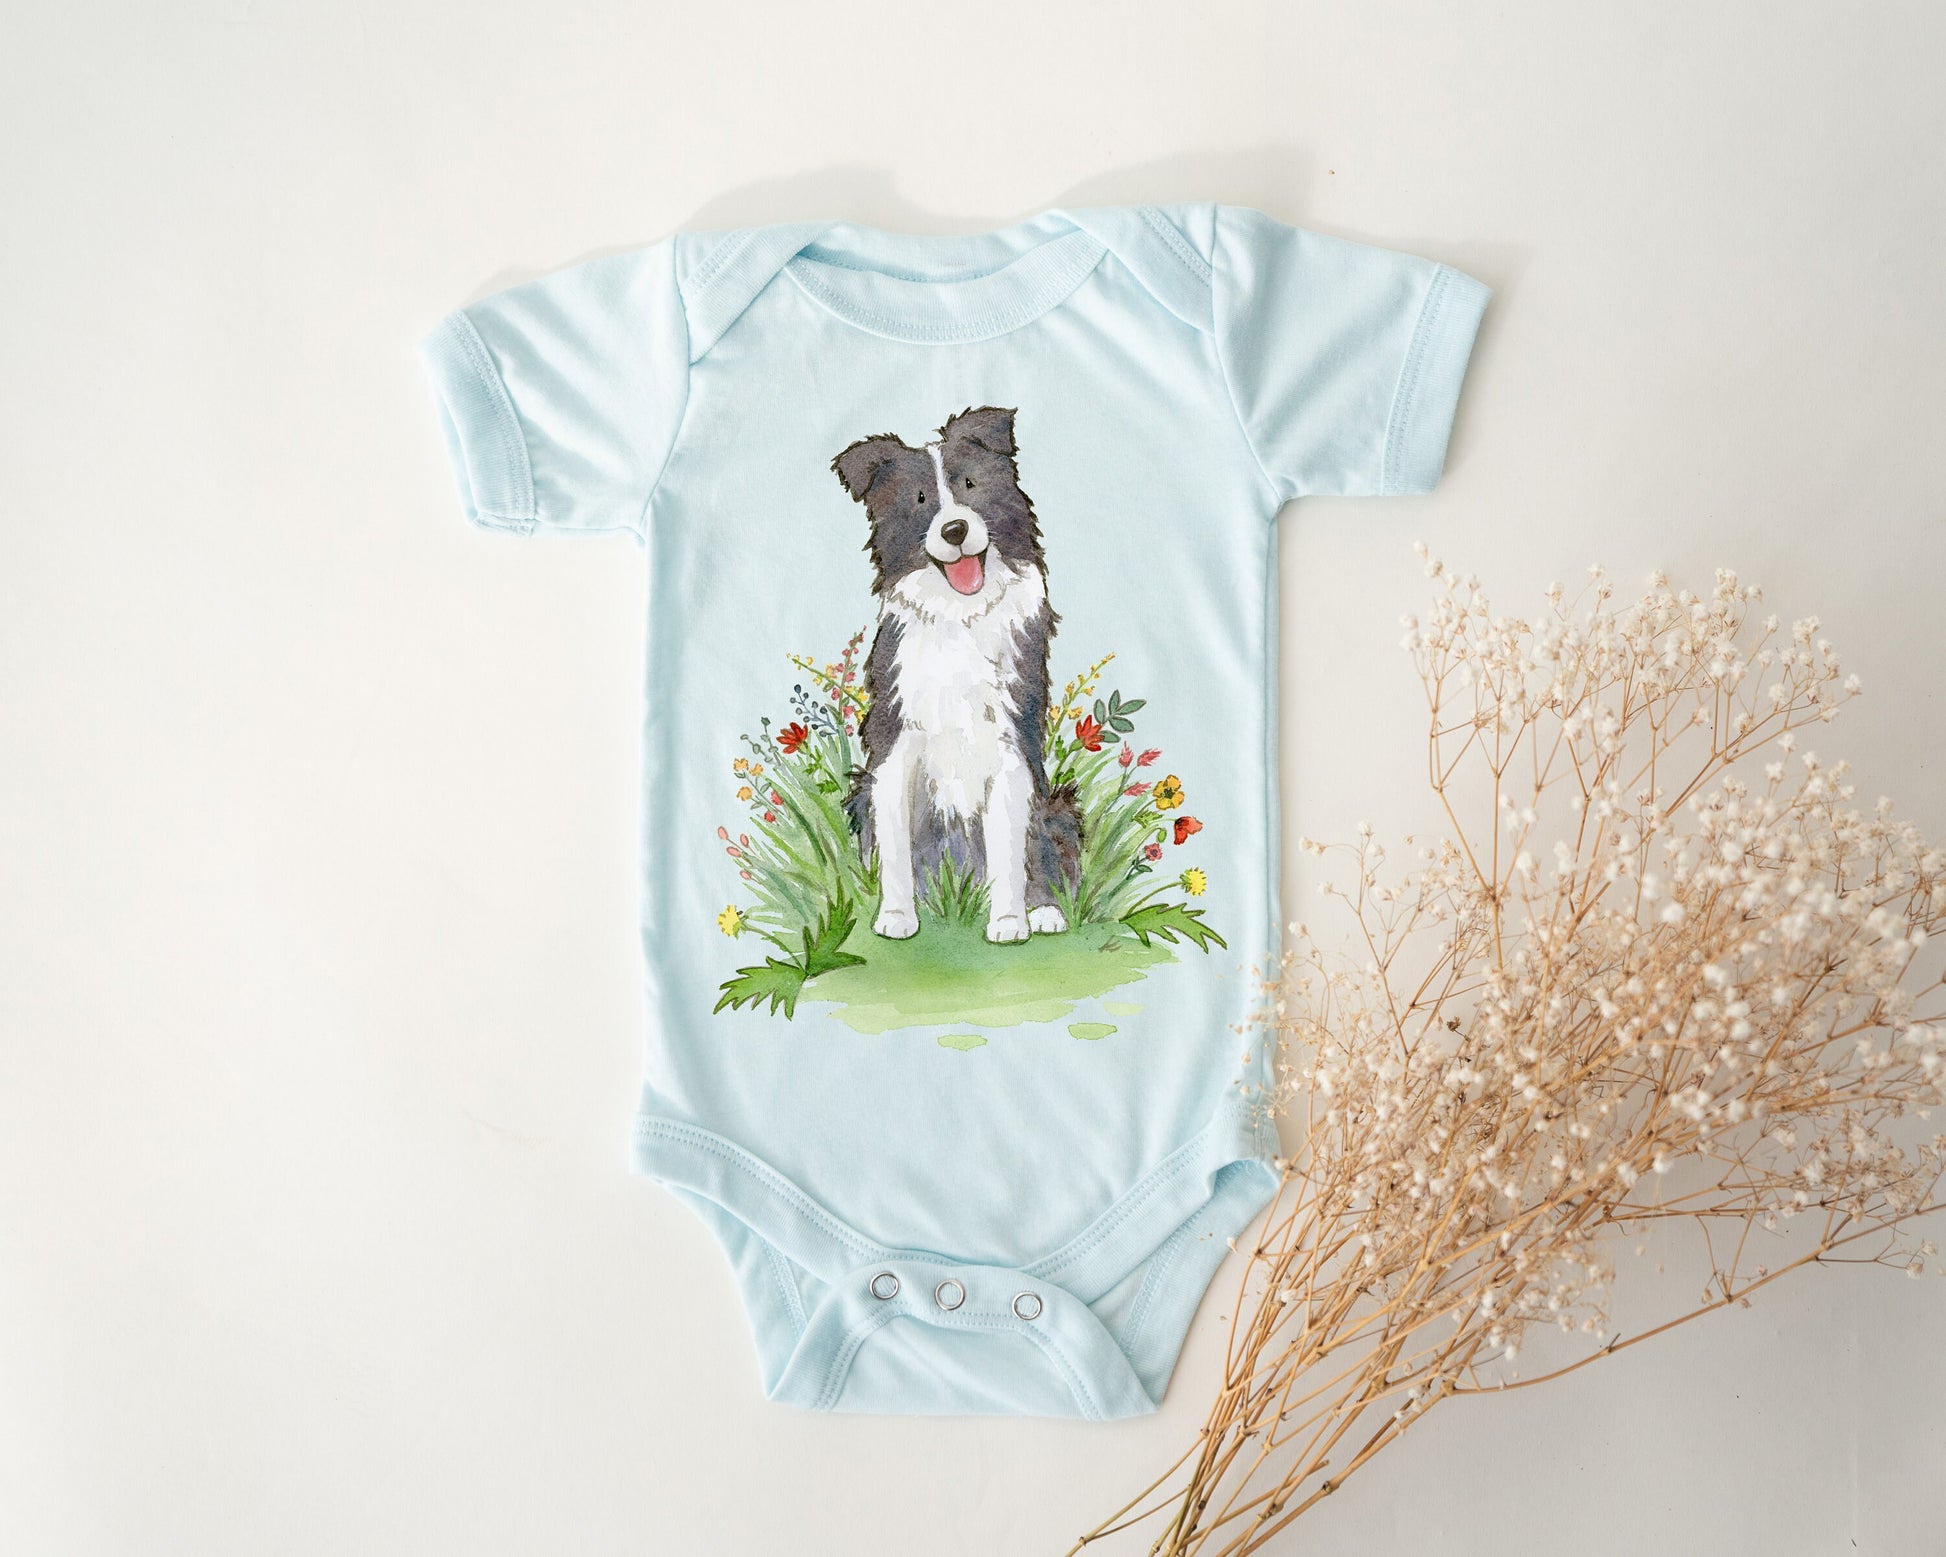 Baby bodysuit with a black and white border collie picture printed on it.